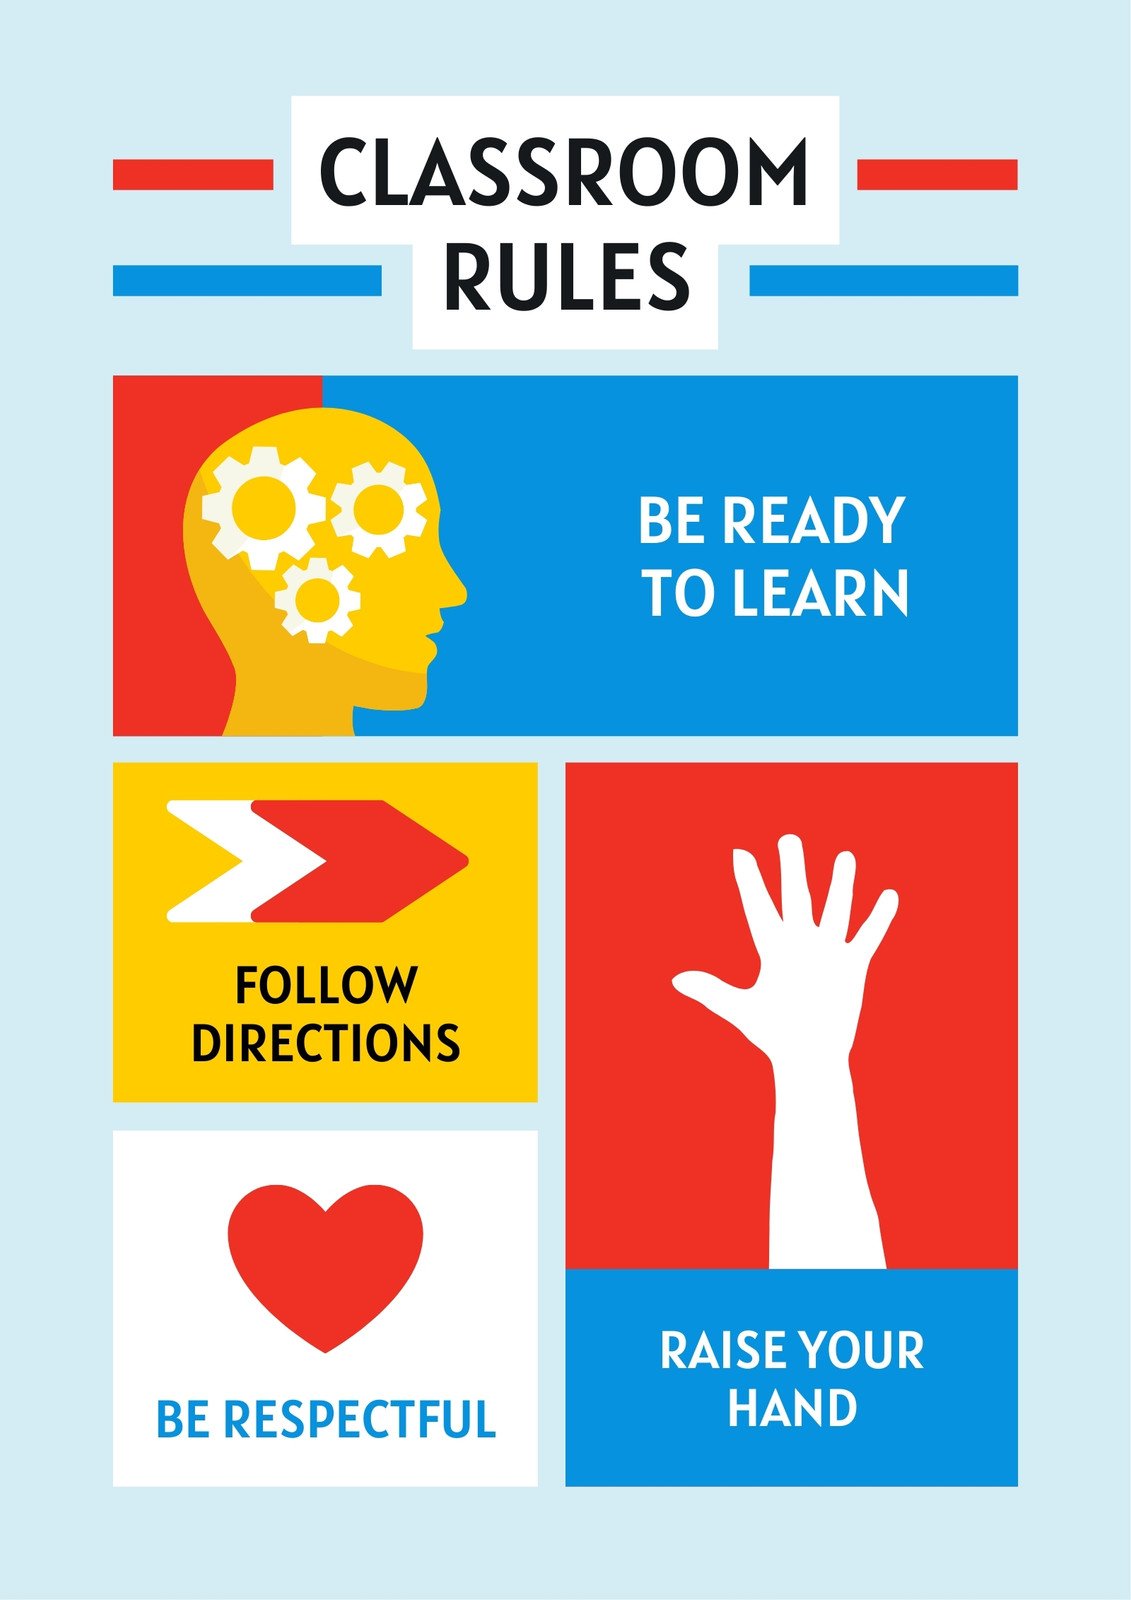 Blue and Red Minimalist Geometric Illustrative Classroom Rules Poster